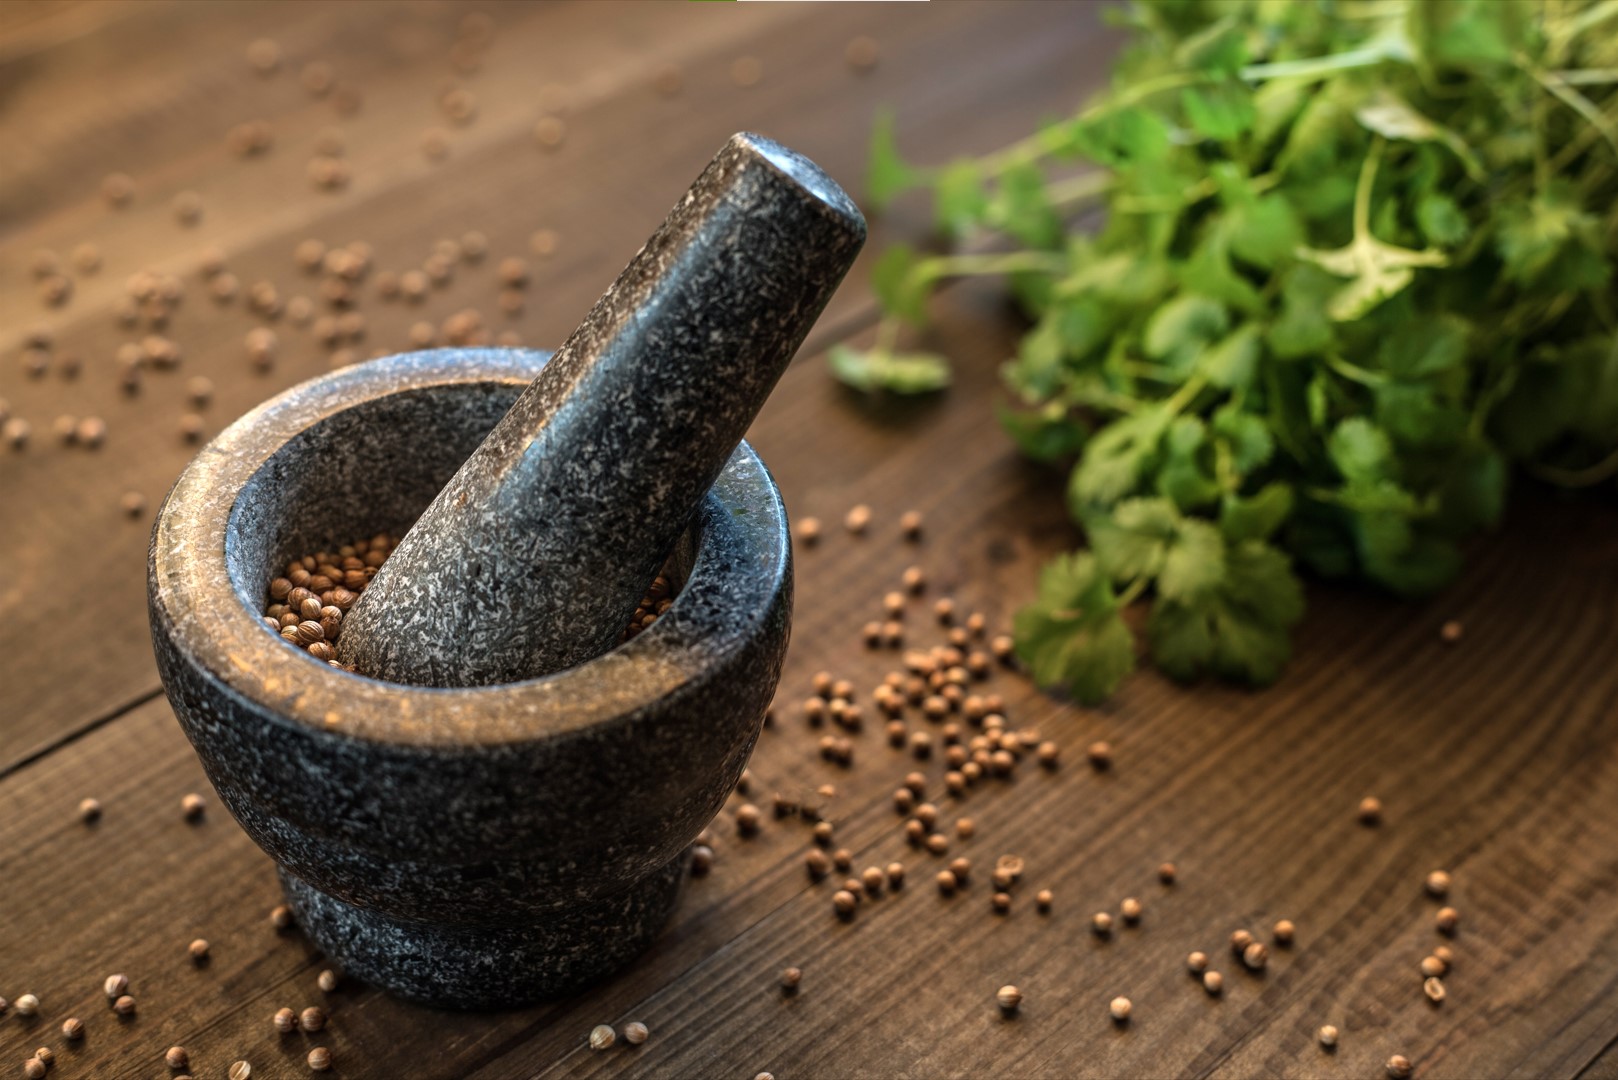 Best Mortar and Pestle Recipes to Make 